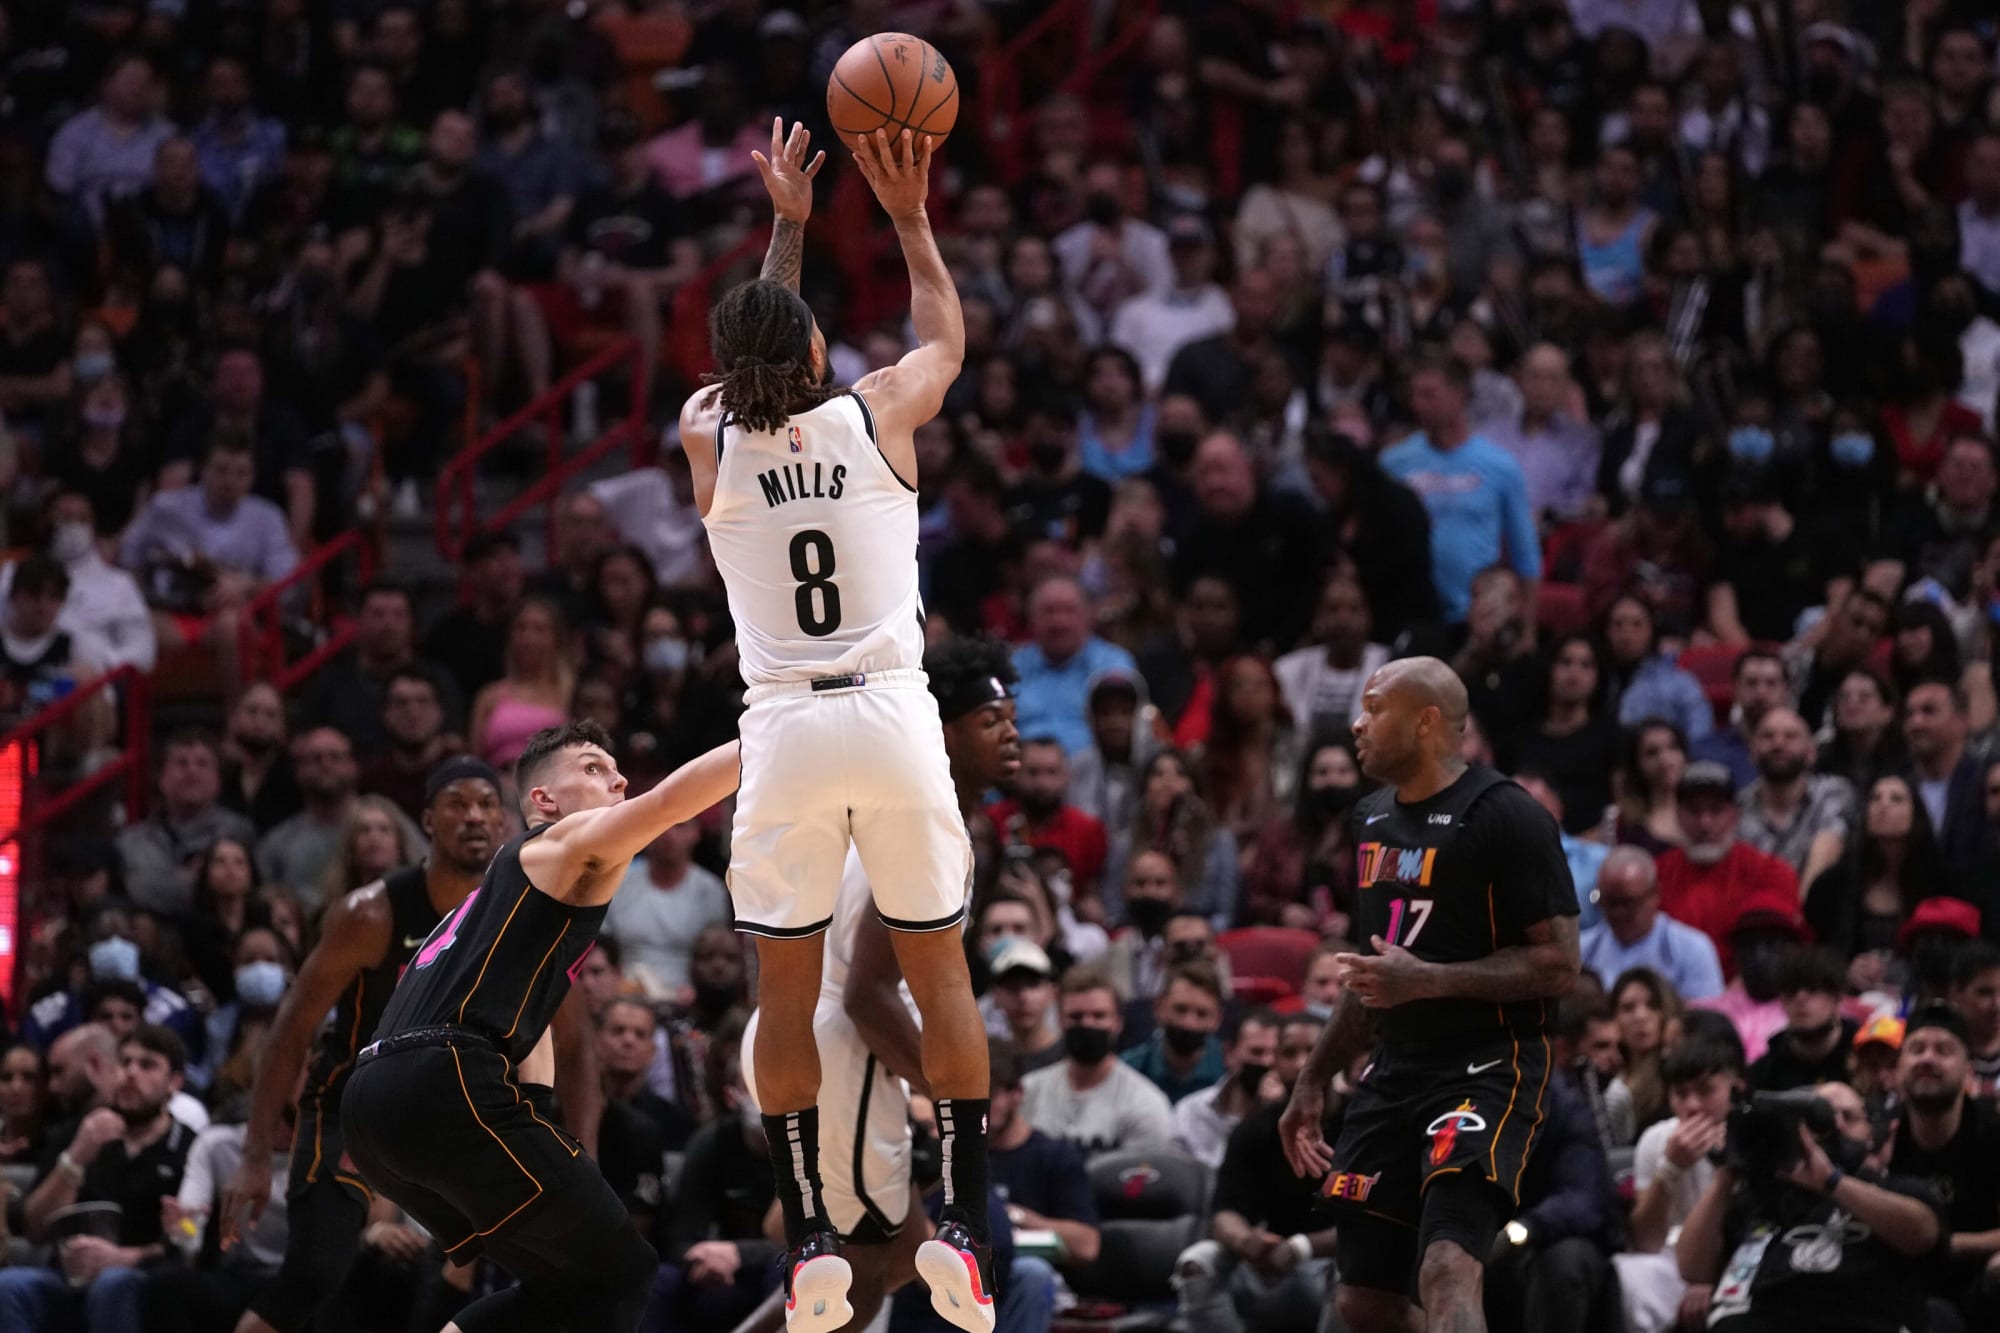 Patty Mills remains humbly confident ahead of NBA All-Star 3-point contest - Nothin' But Nets